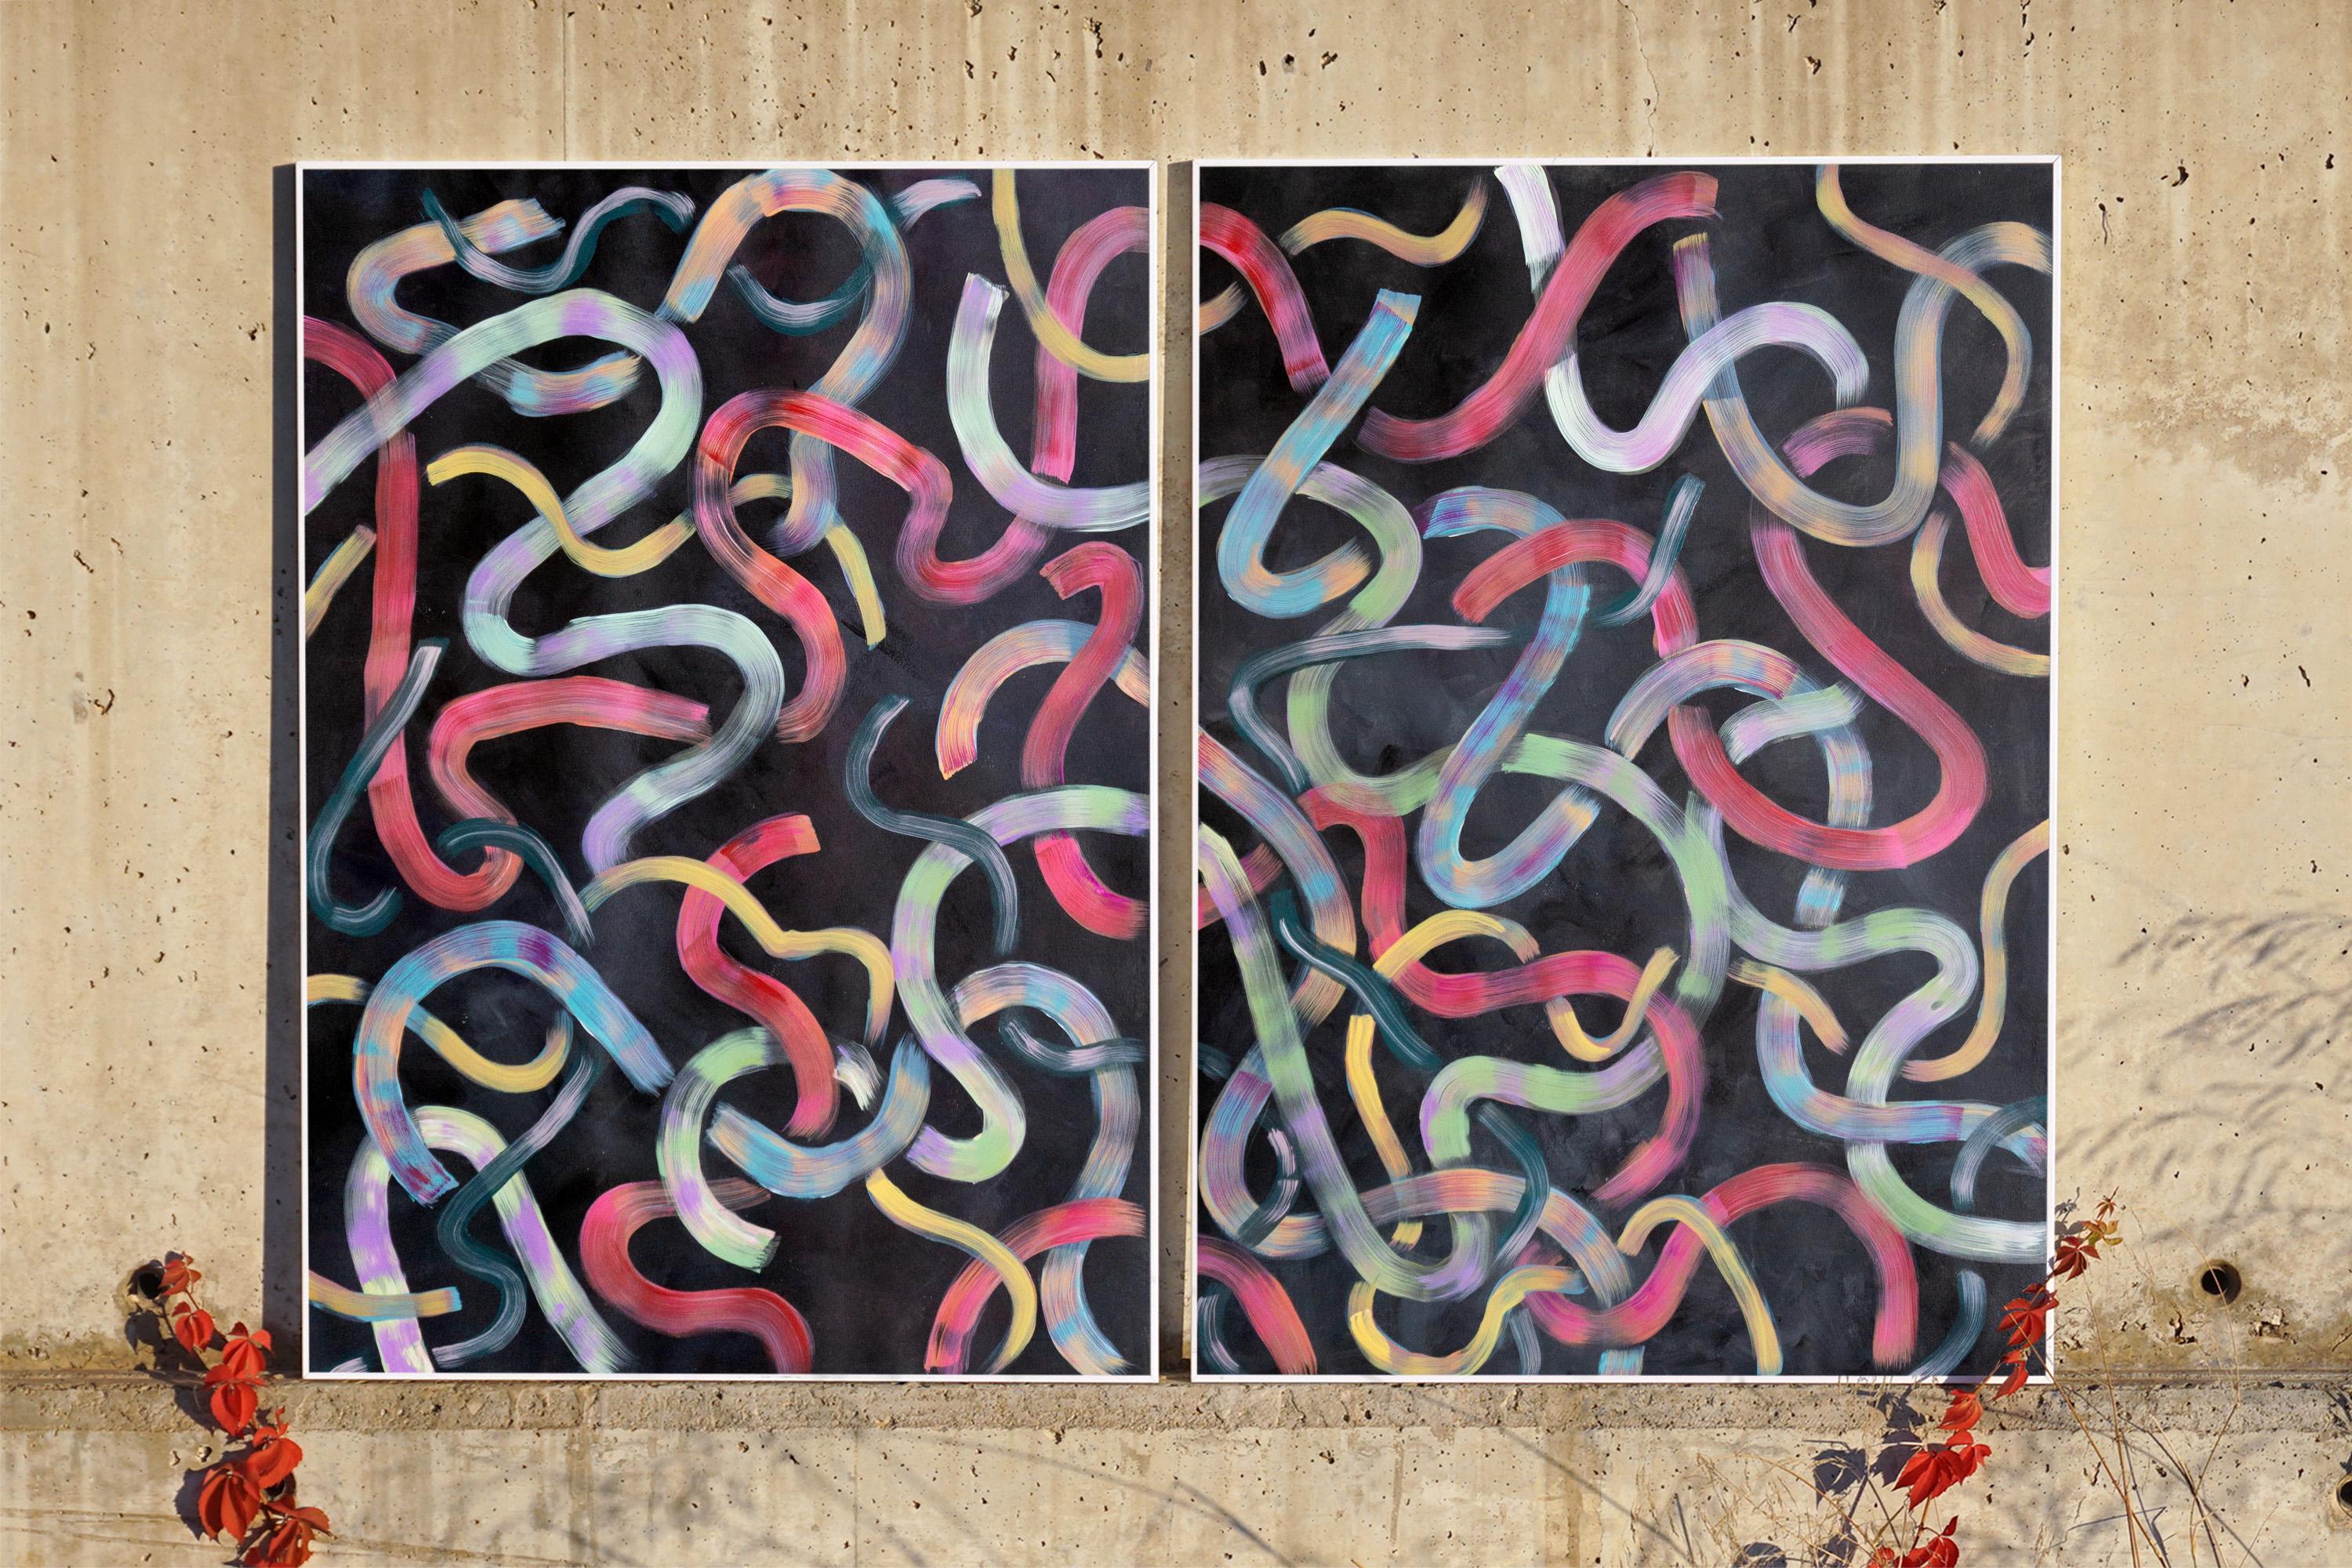 Neon City Lights on Black, Vivid Acrylic Diptych, Abstract Brushstrokes Painting 4